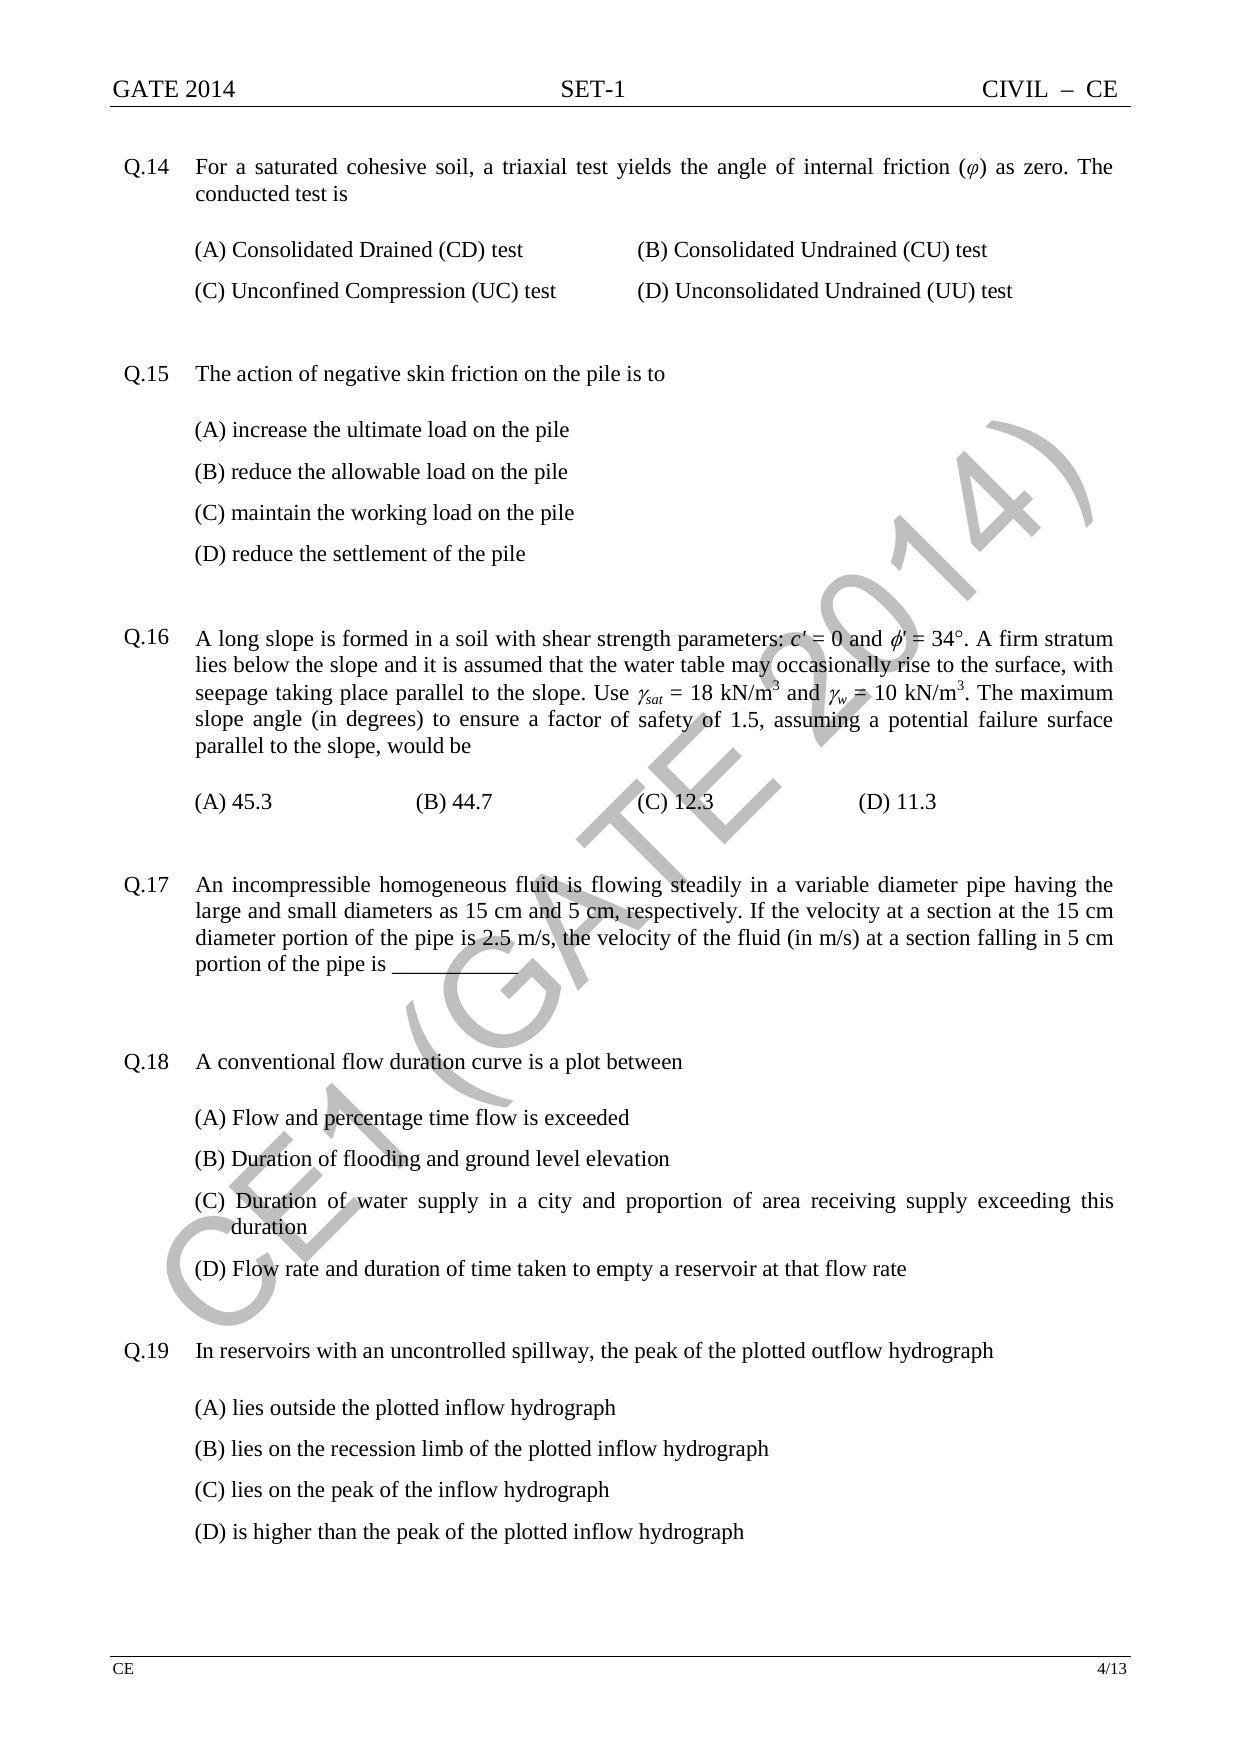 GATE 2014 Civil Engineering (CE) Question Paper with Answer Key - Page 11